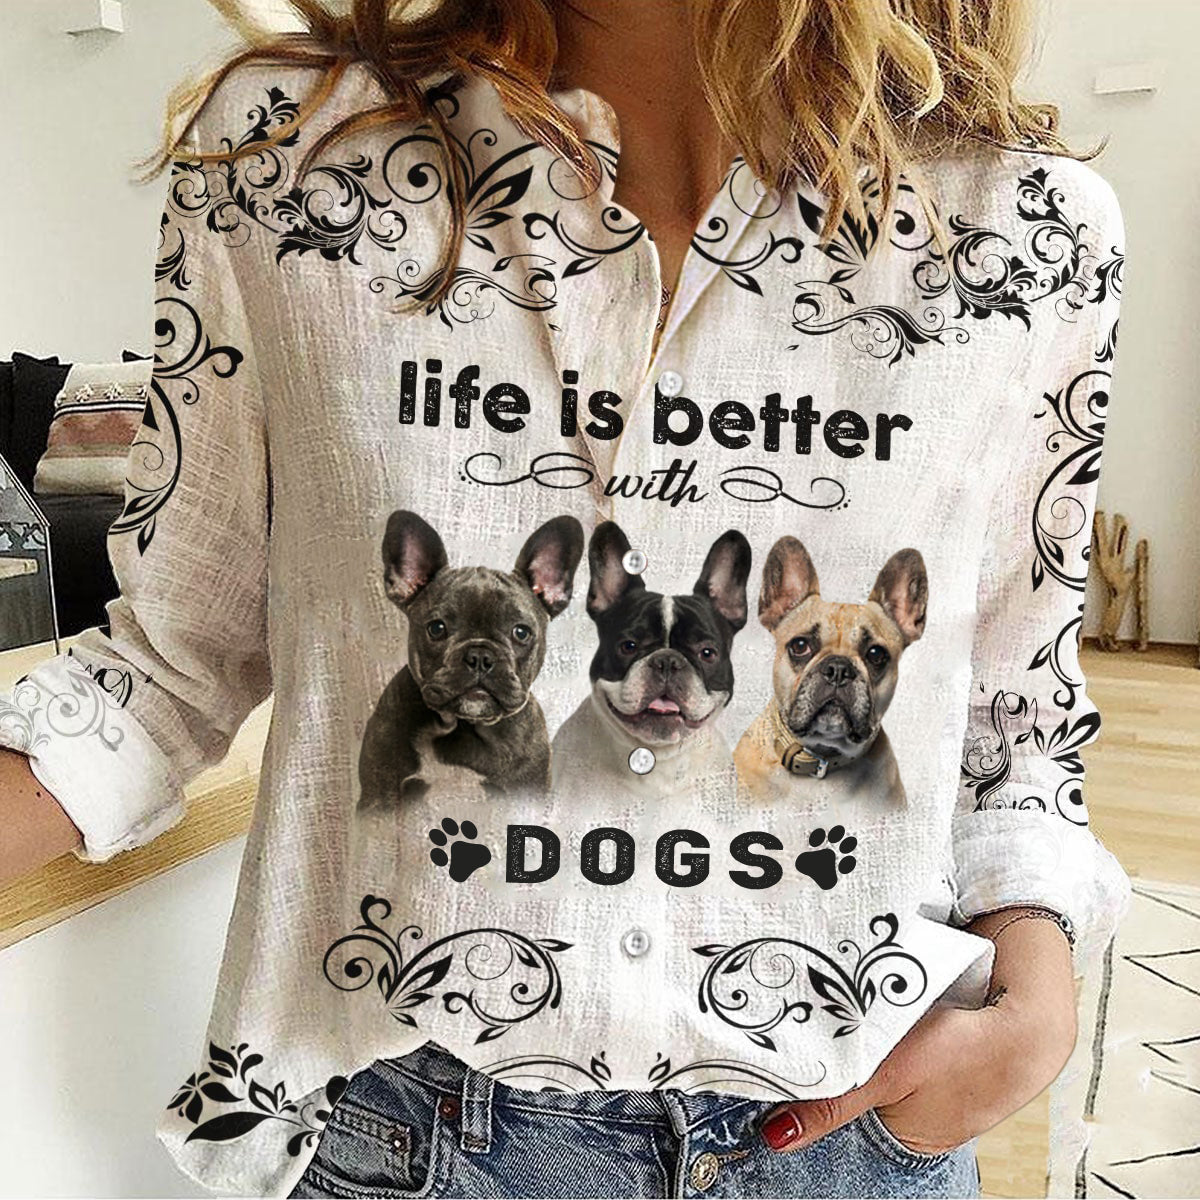 French Bulldog02 -Life Is Better With Dogs Women's Long-Sleeve Shirt